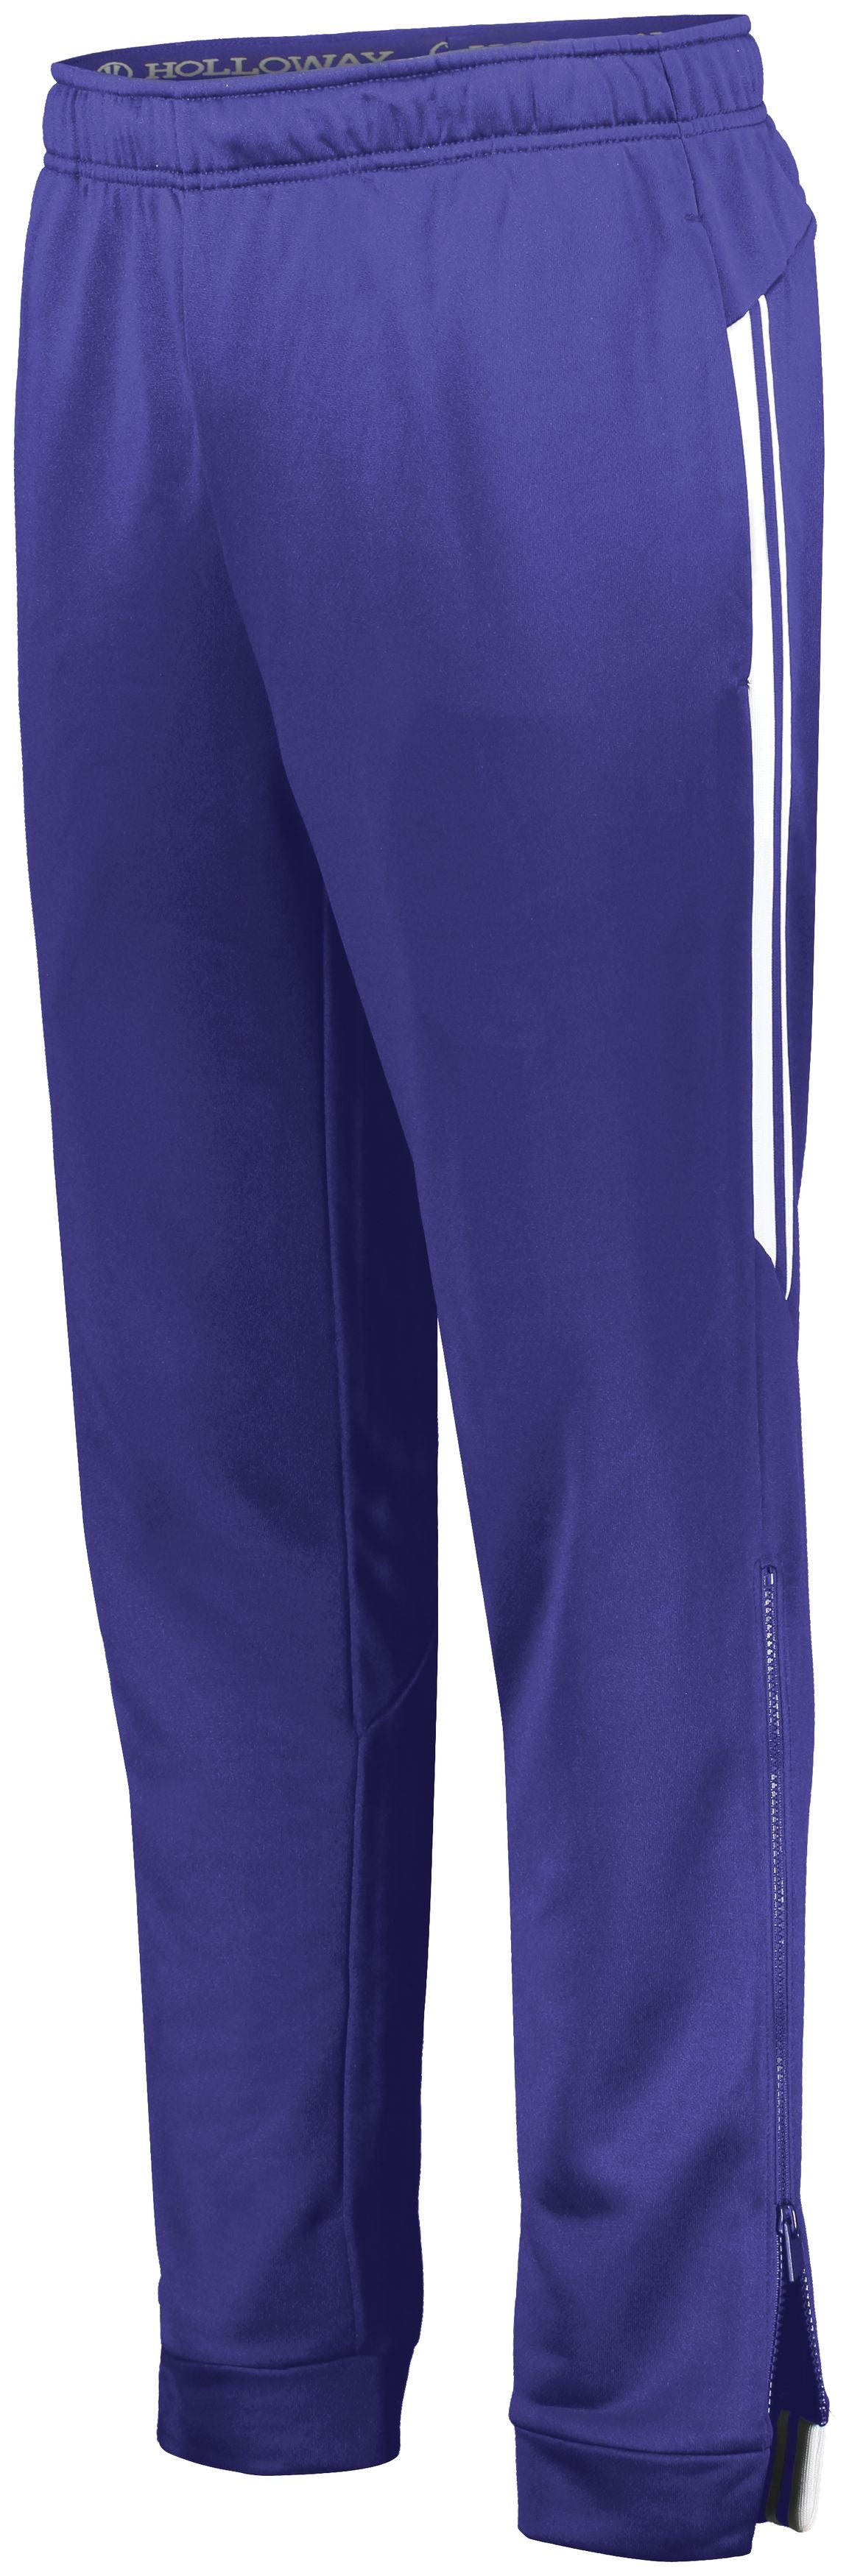 Holloway Retro Grade Pant in Purple/White  -Part of the Adult, Adult-Pants, Pants, Holloway product lines at KanaleyCreations.com